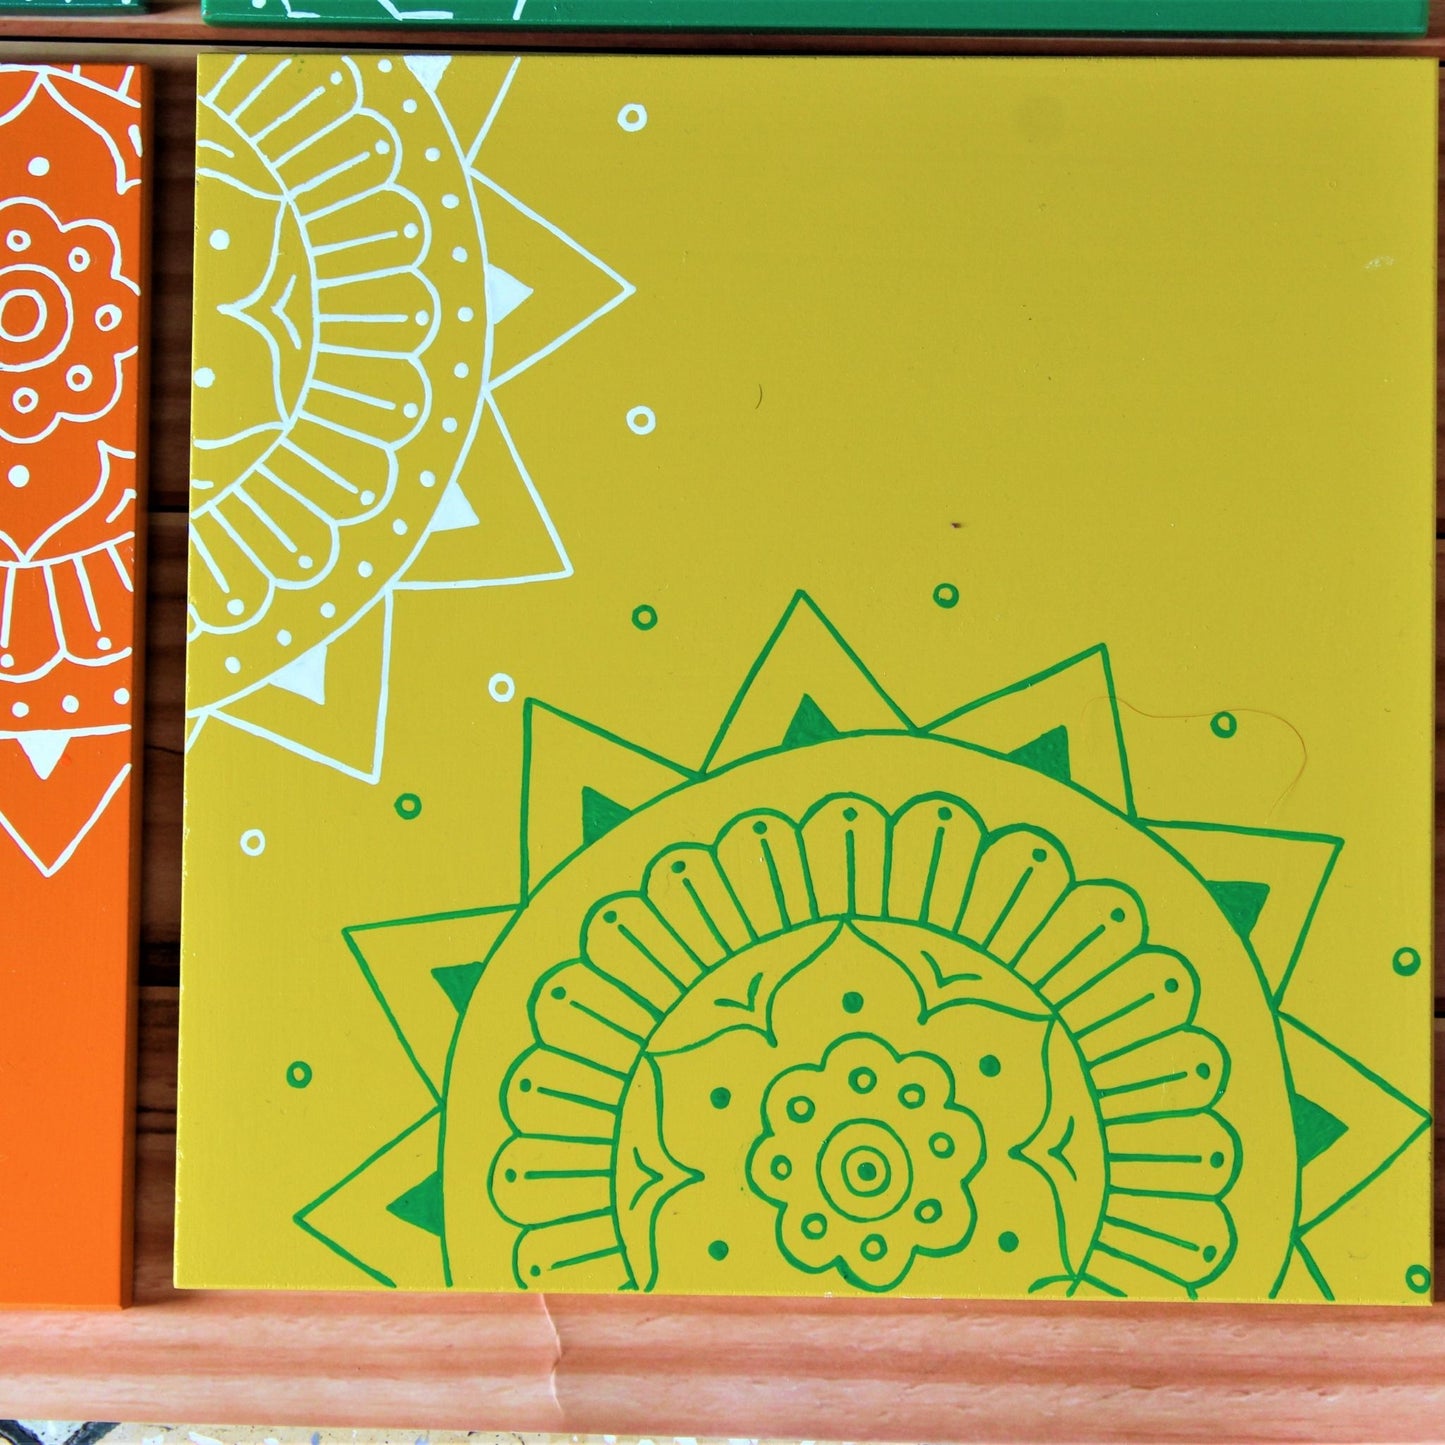 Kumouni Aipan Inspired Wall Frame Tile Handpainted in Green, White and Yellow Colors.